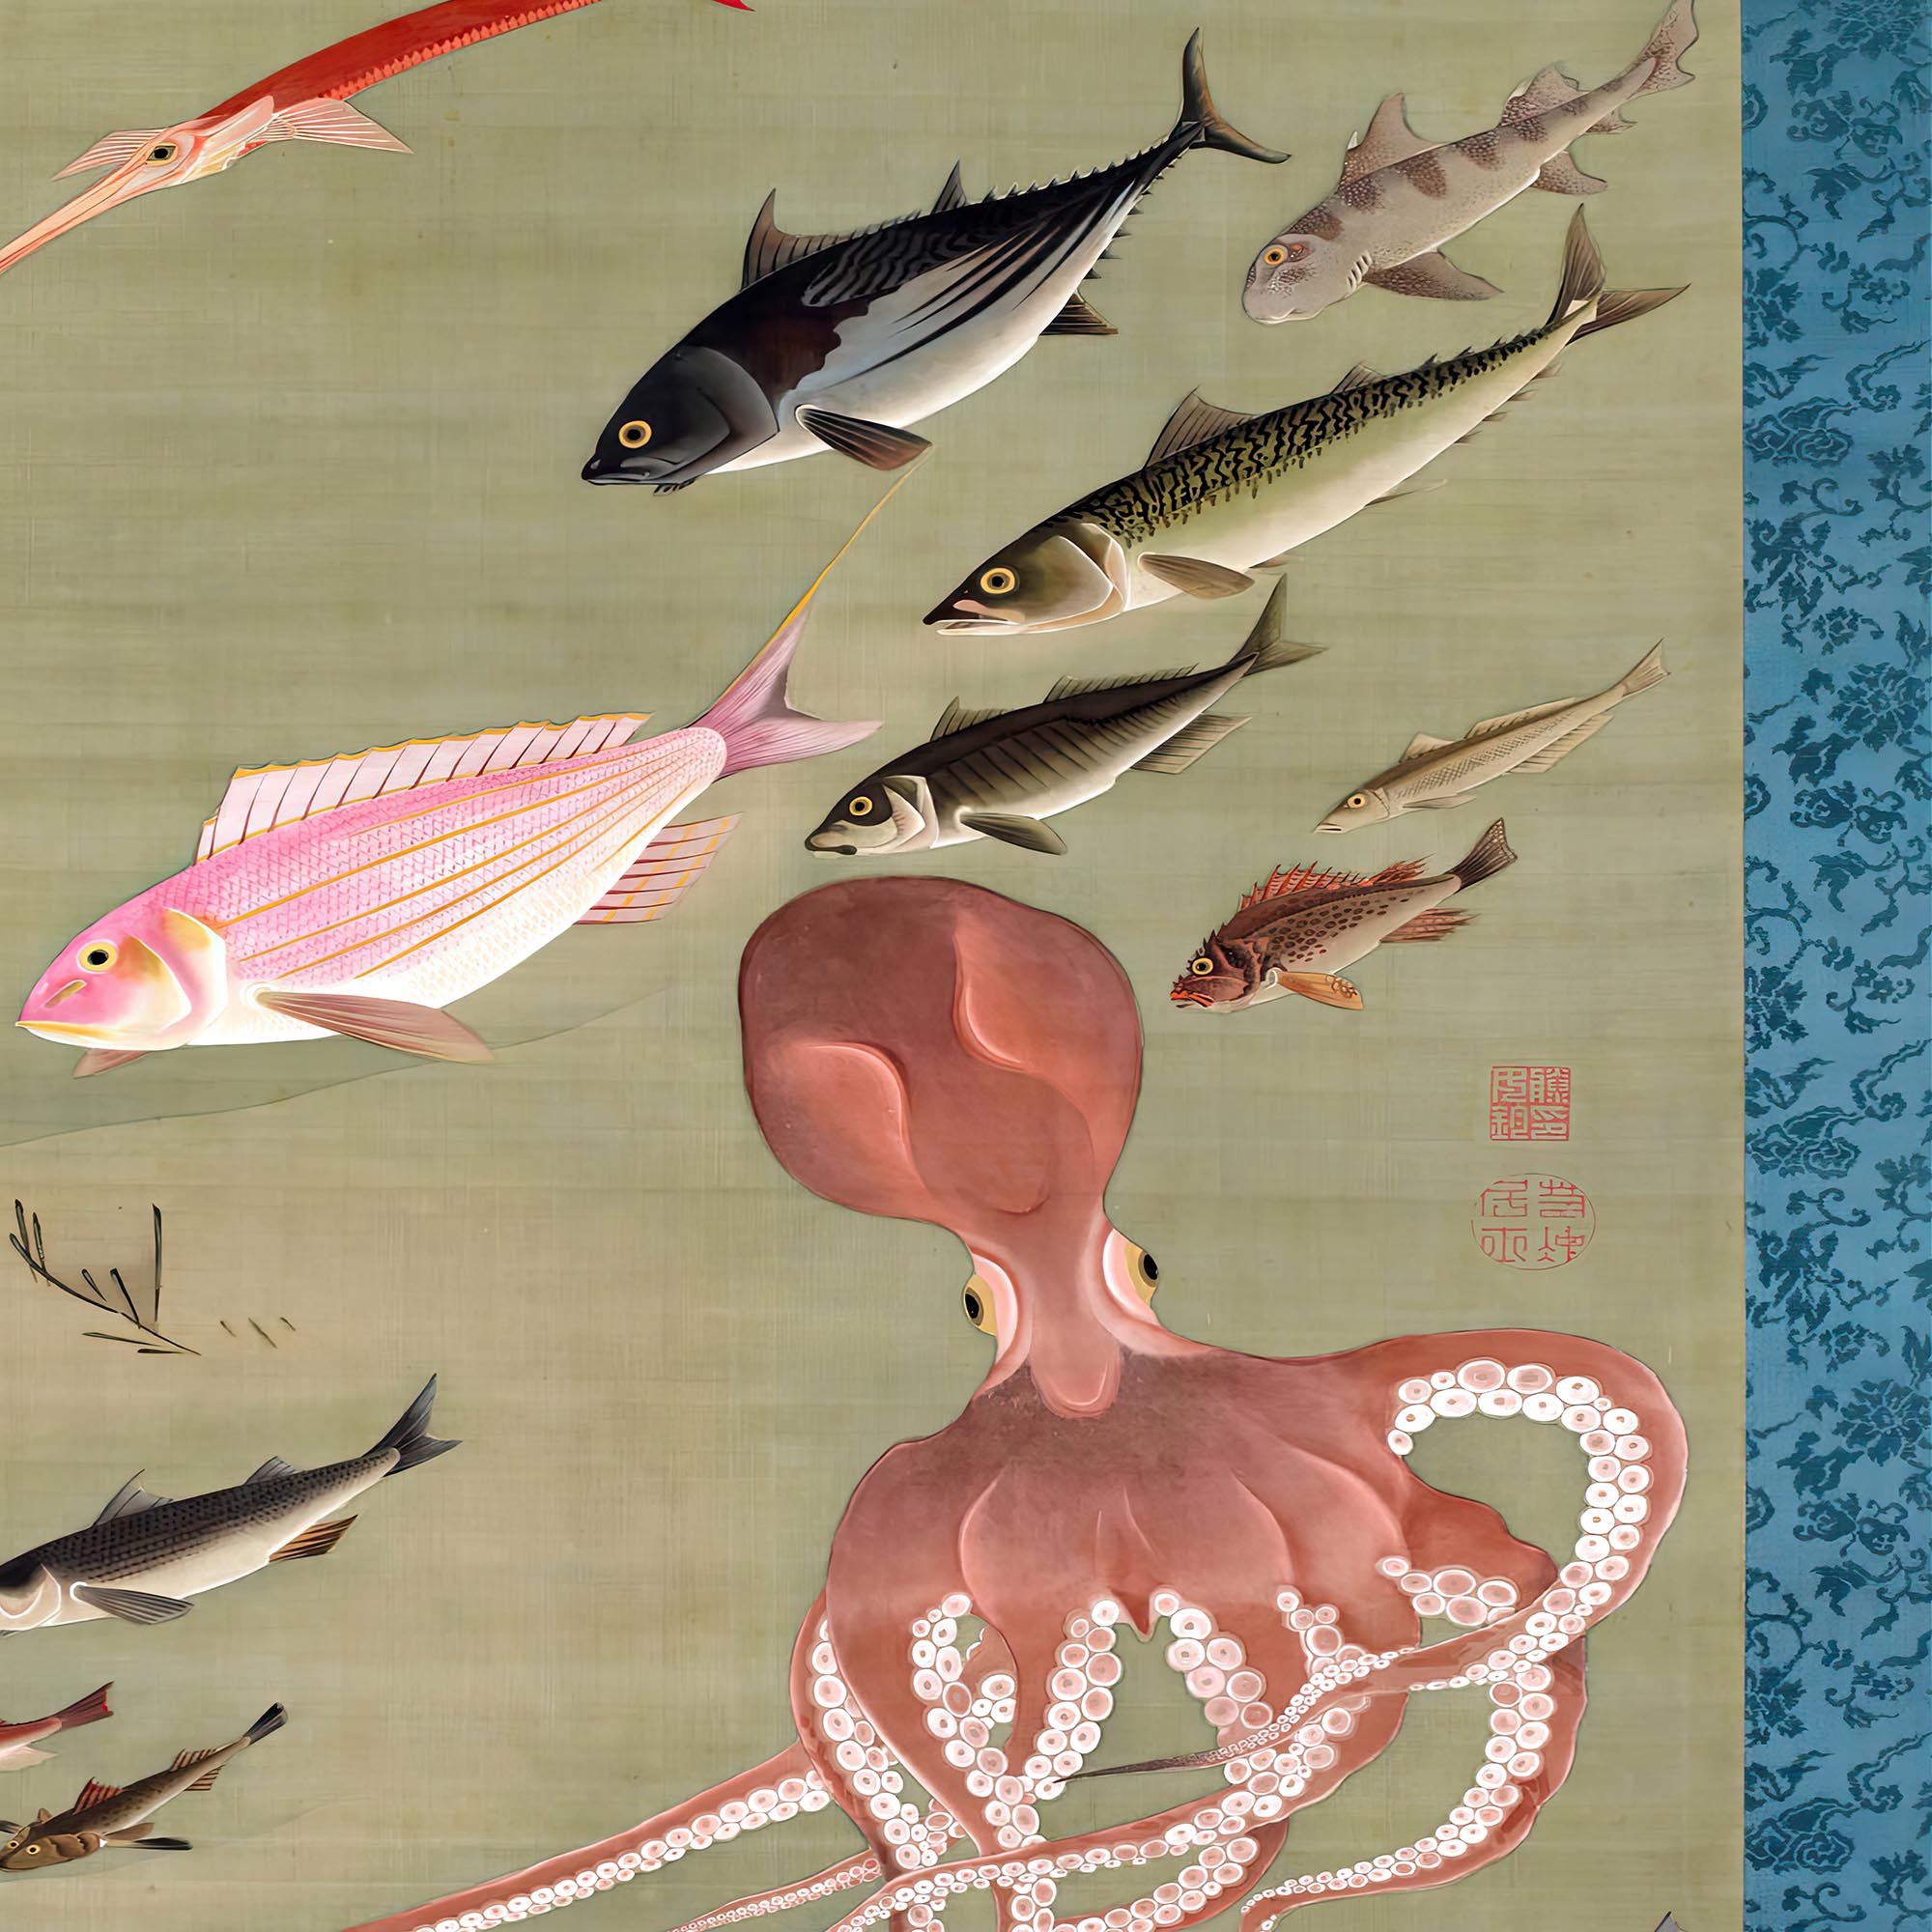 Fine art Colorful Realm of Living Beings | Fish and Octopus Vintage Japanese Painting of Aquatic Life Fine Art Pint